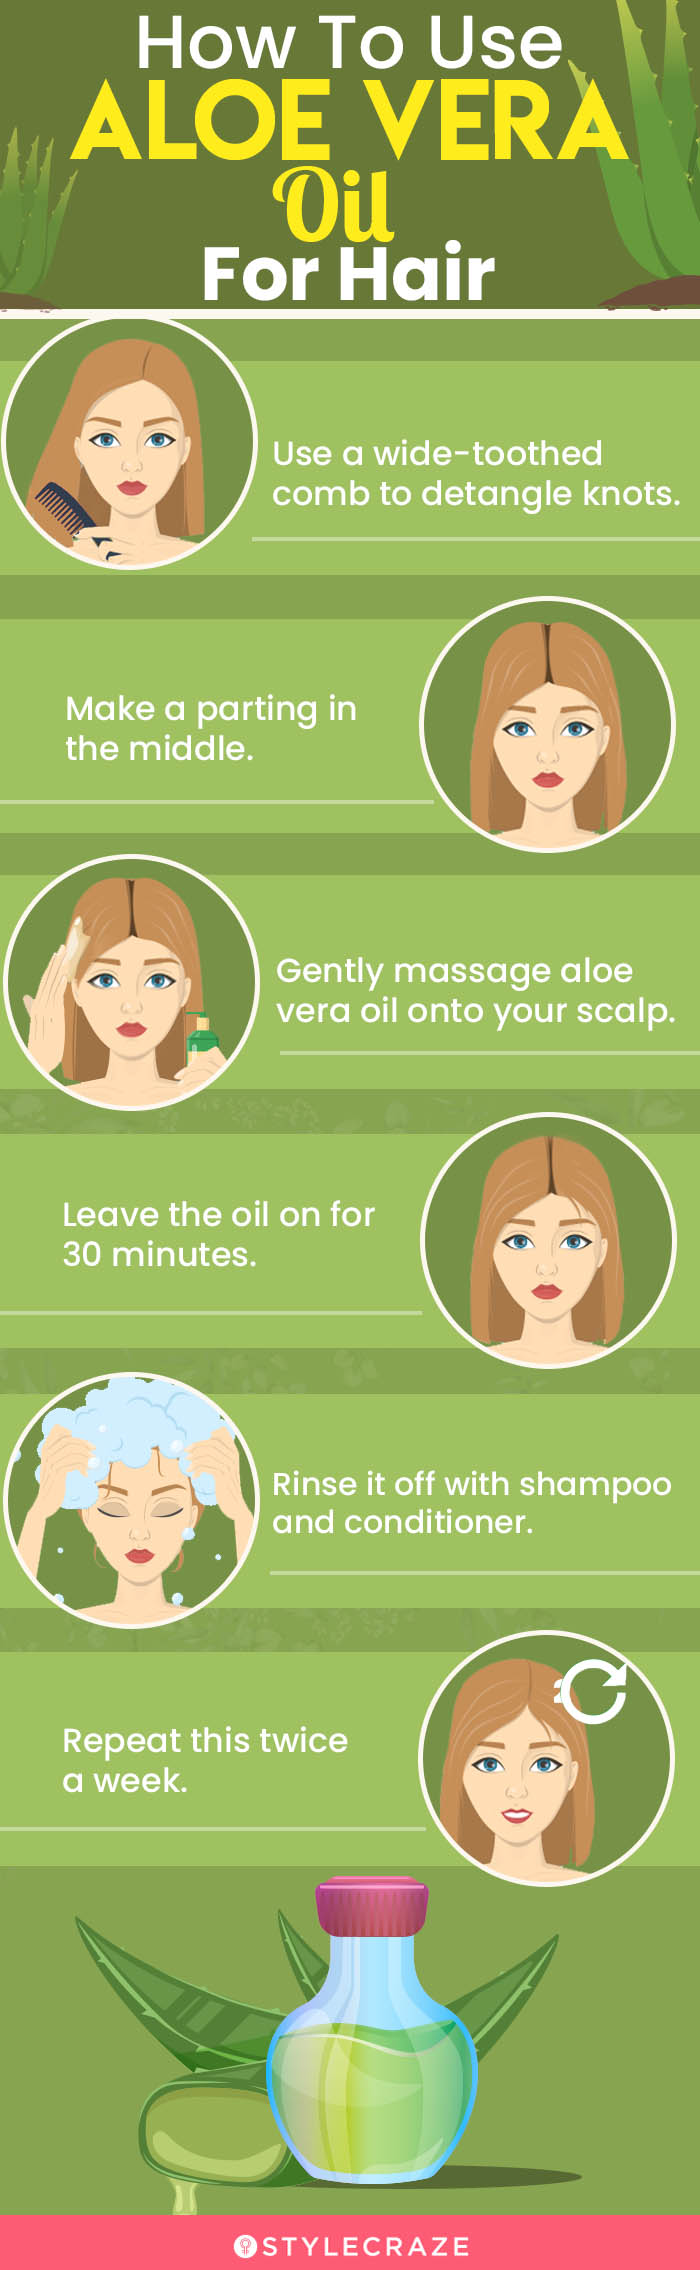 What Is Aloe Vera Oil? Its Benefits, Uses, & How To Make It